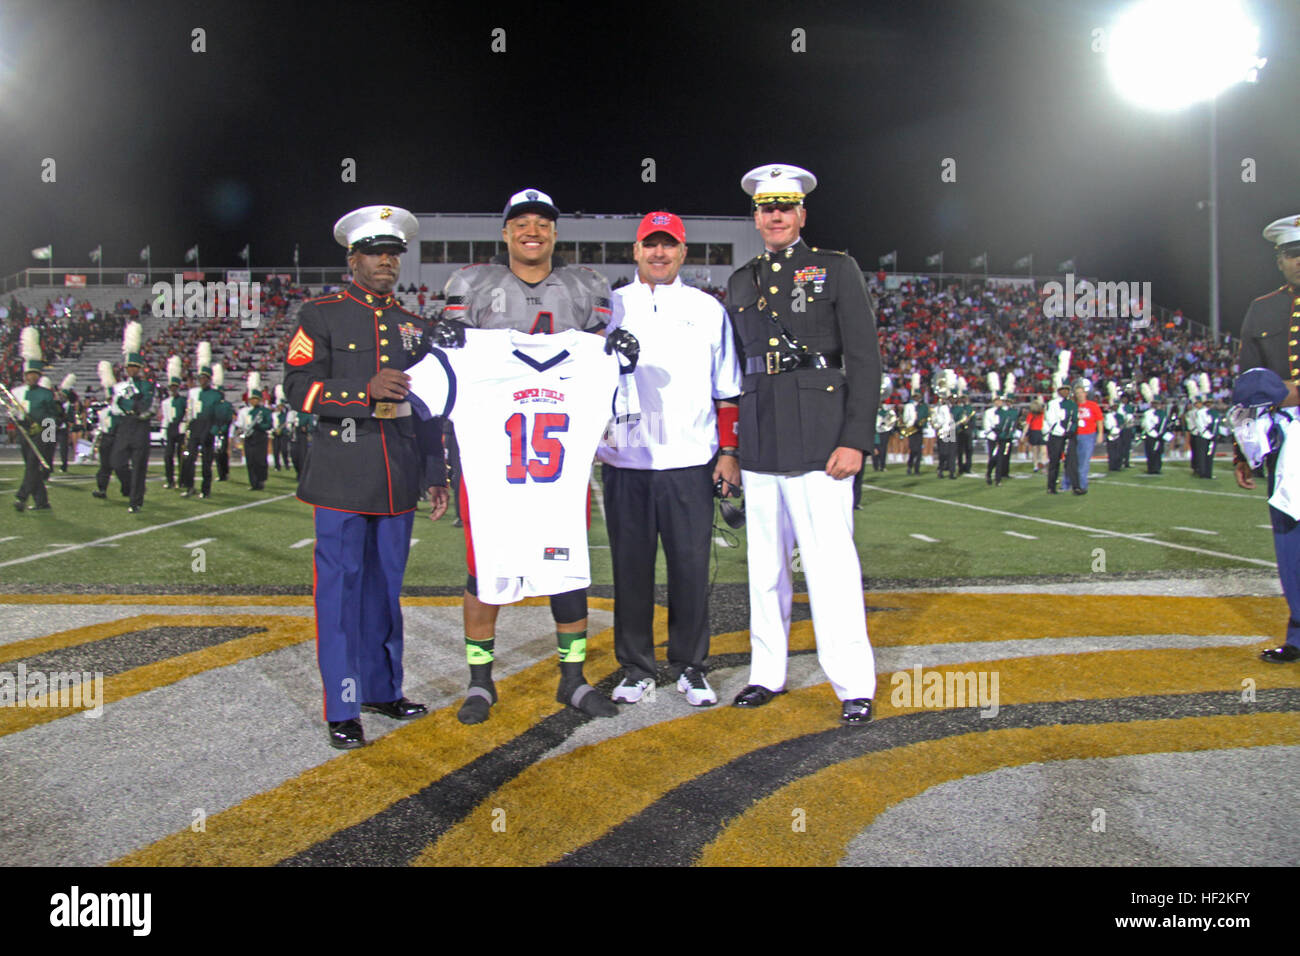 Richard Moore, a linebacker from Cedar Hill High School selected to play in the 2015 Semper Fidelis All-American Bowl, alongside Joey McGuire, Cedar Hill High School Head Football Coach, receives his jersey from Maj. Charles Nicol (right), the commanding officer of Recruiting Station Dallas, and Sgt. Timothy Clark (left), a recruiter with Recruiting Substation Dallas South, during the halftime ceremony of the Desoto vs. Cedar Hill High School football game Oct. 23. The United States Marine Corps is recognizing exemplary student athletes across the country through the Semper Fi Bowl. Now in its Stock Photo